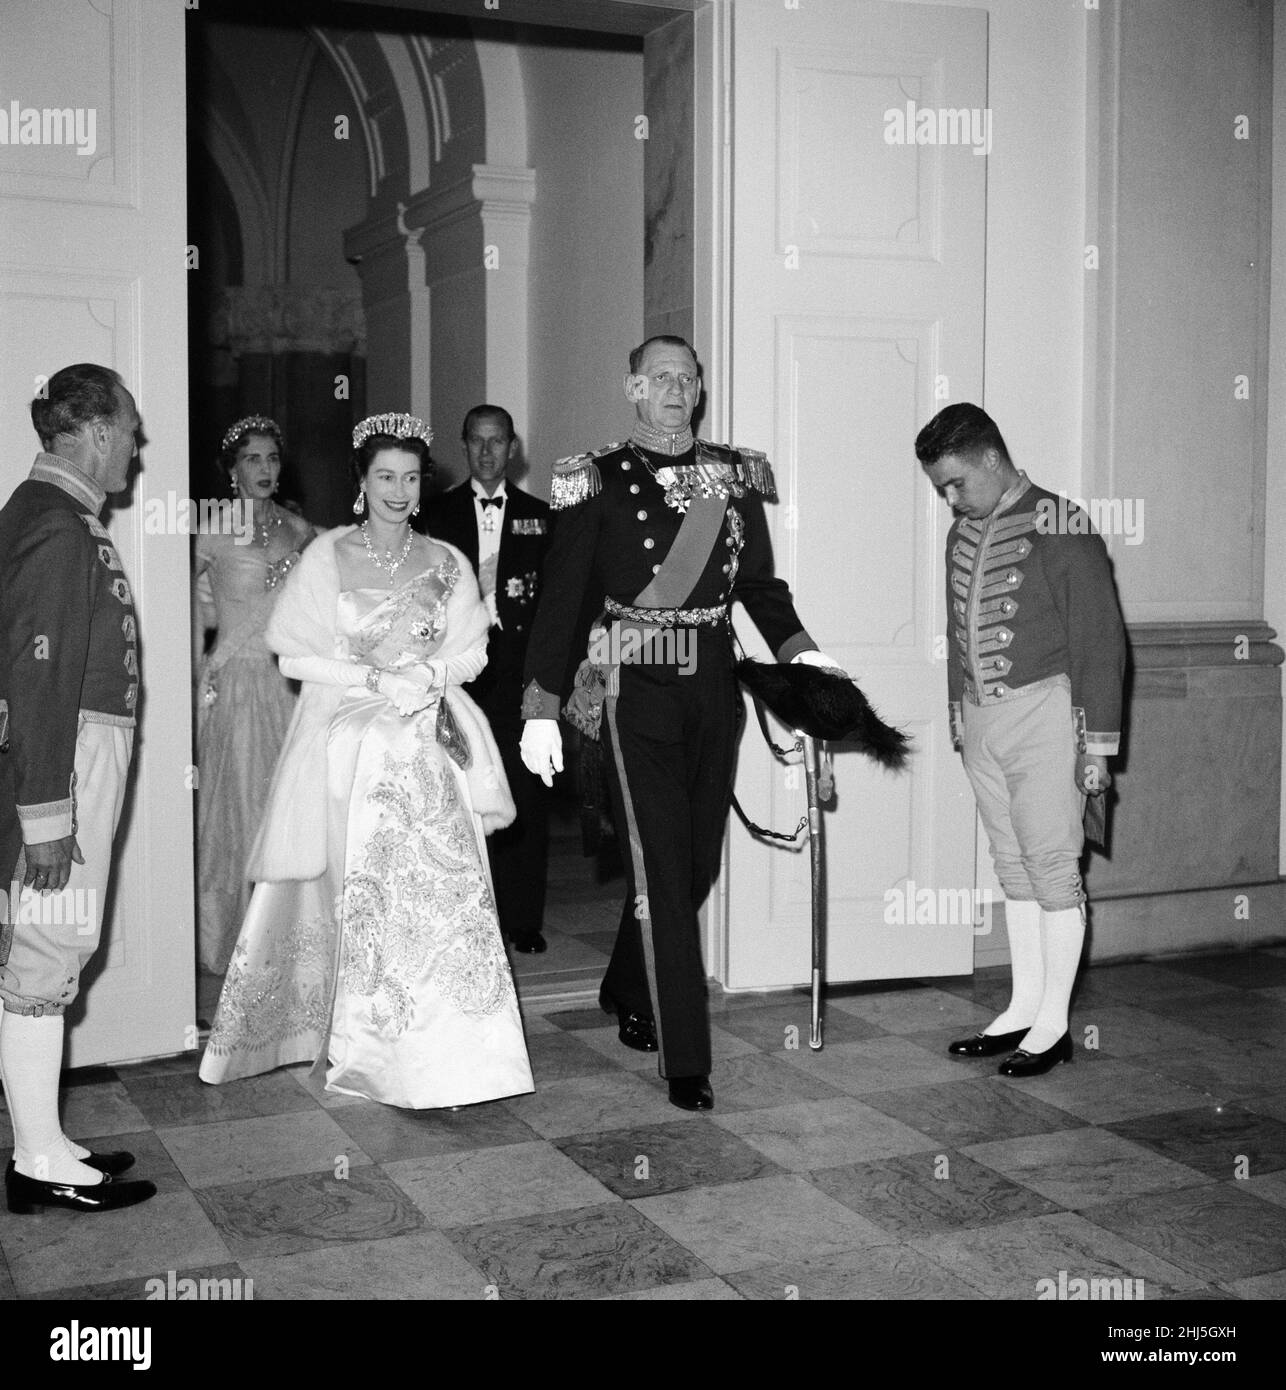 Queen Elizabeth II and Prince Philip, Duke of Edinburgh visit to Denmark. Pictured, Queen Elizabeth and King Frederik IX of Denmark at Christiansborg Palace arriving for a state banquet. Behind them are Queen Ingrid of Denmark and Prince Philip. Queen Elizabeth's fabulous Norman Hartnell gown is made of pale pink satin and trimmed with a gleaming jewelled pattern. Over her shoulder she wears the blue sash of the Danish Order of the elephant. 21st May 1957. Stock Photo